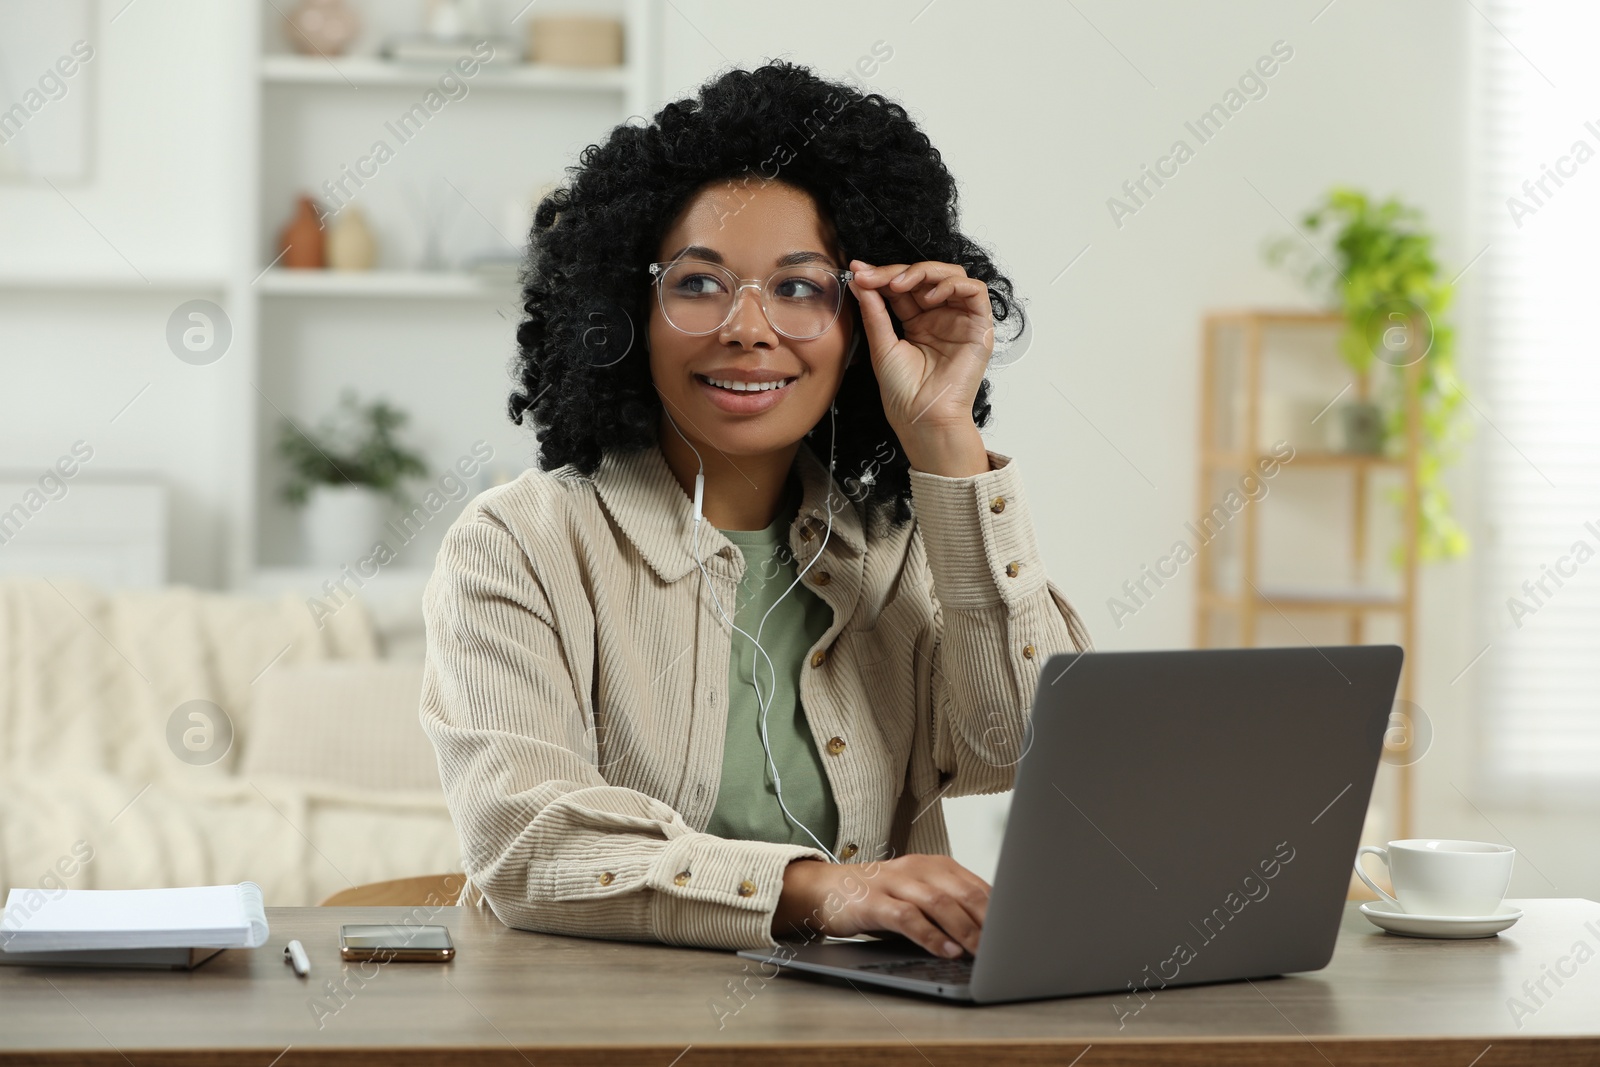 Photo of Happy young woman with laptop at wooden desk indoors